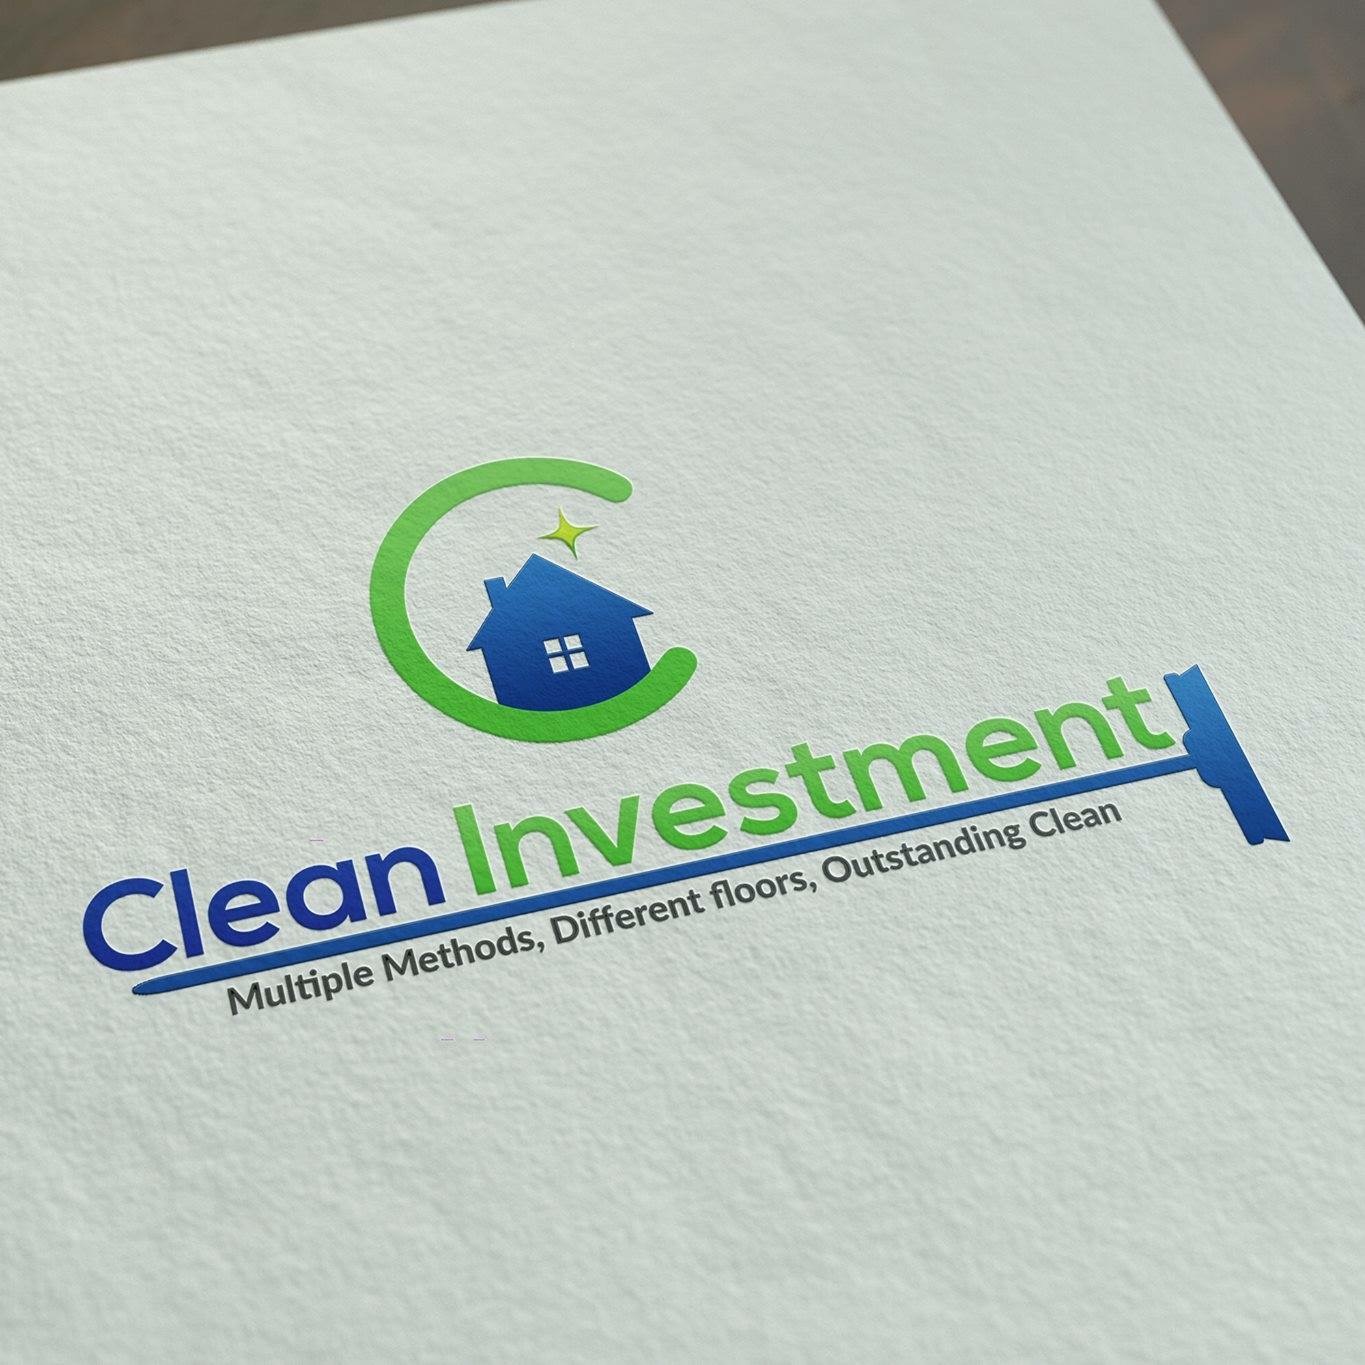 Clean Investment logo